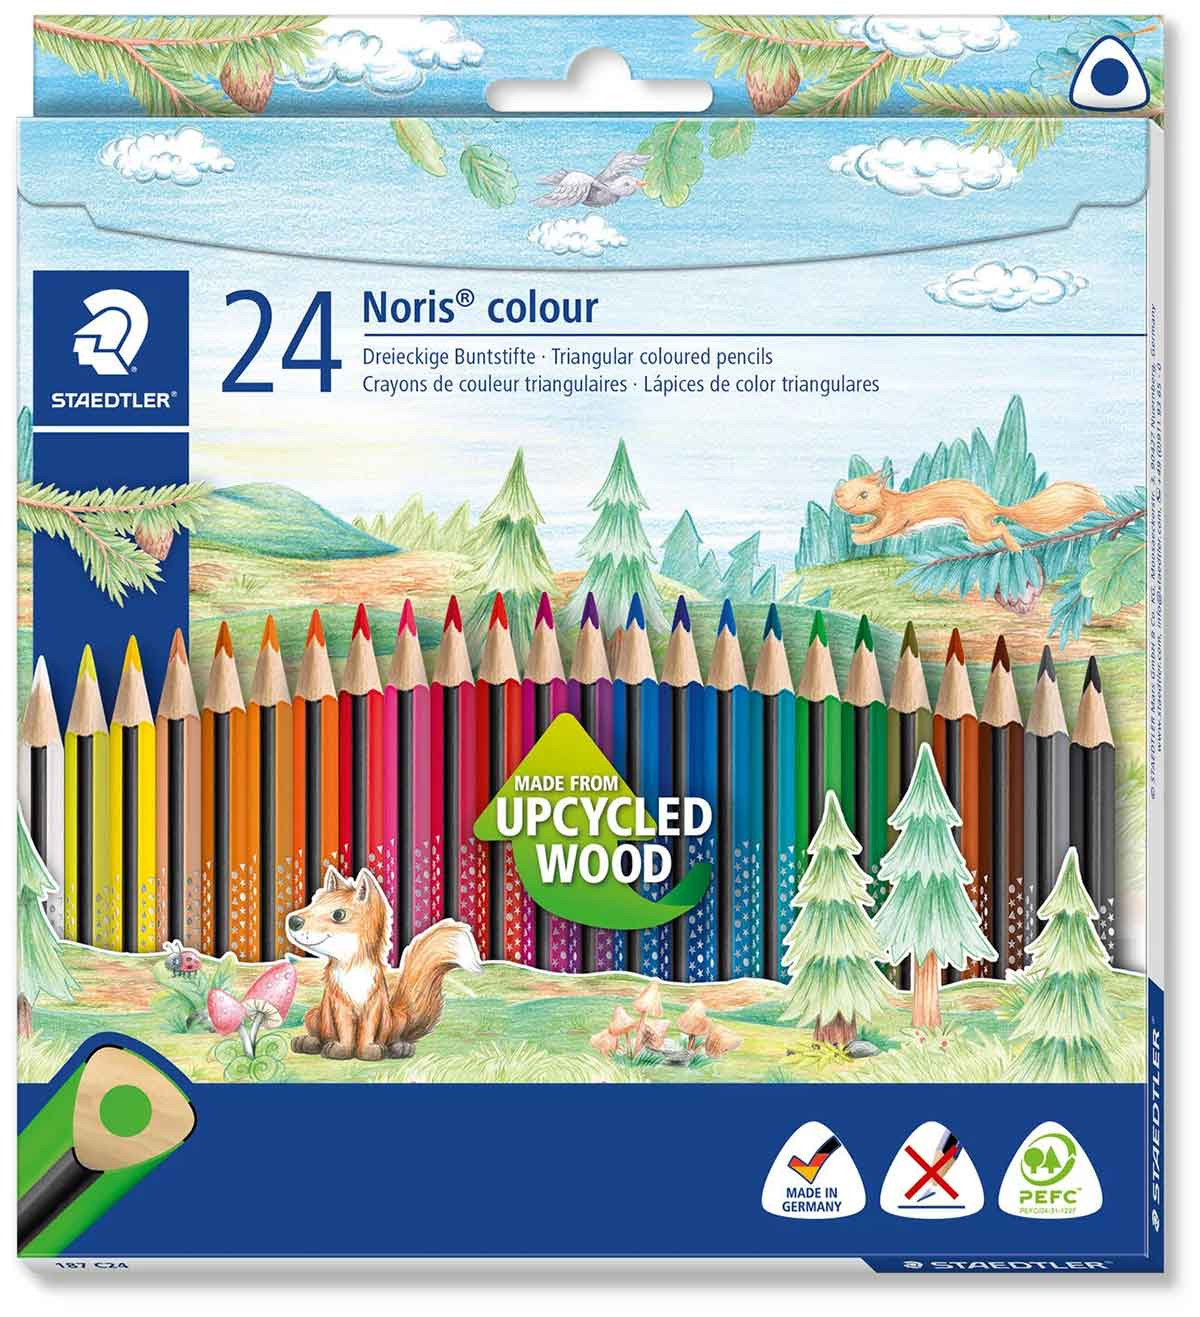 Staedtler Noris Colouring Pencils - Assorted Colours (Pack of 24)